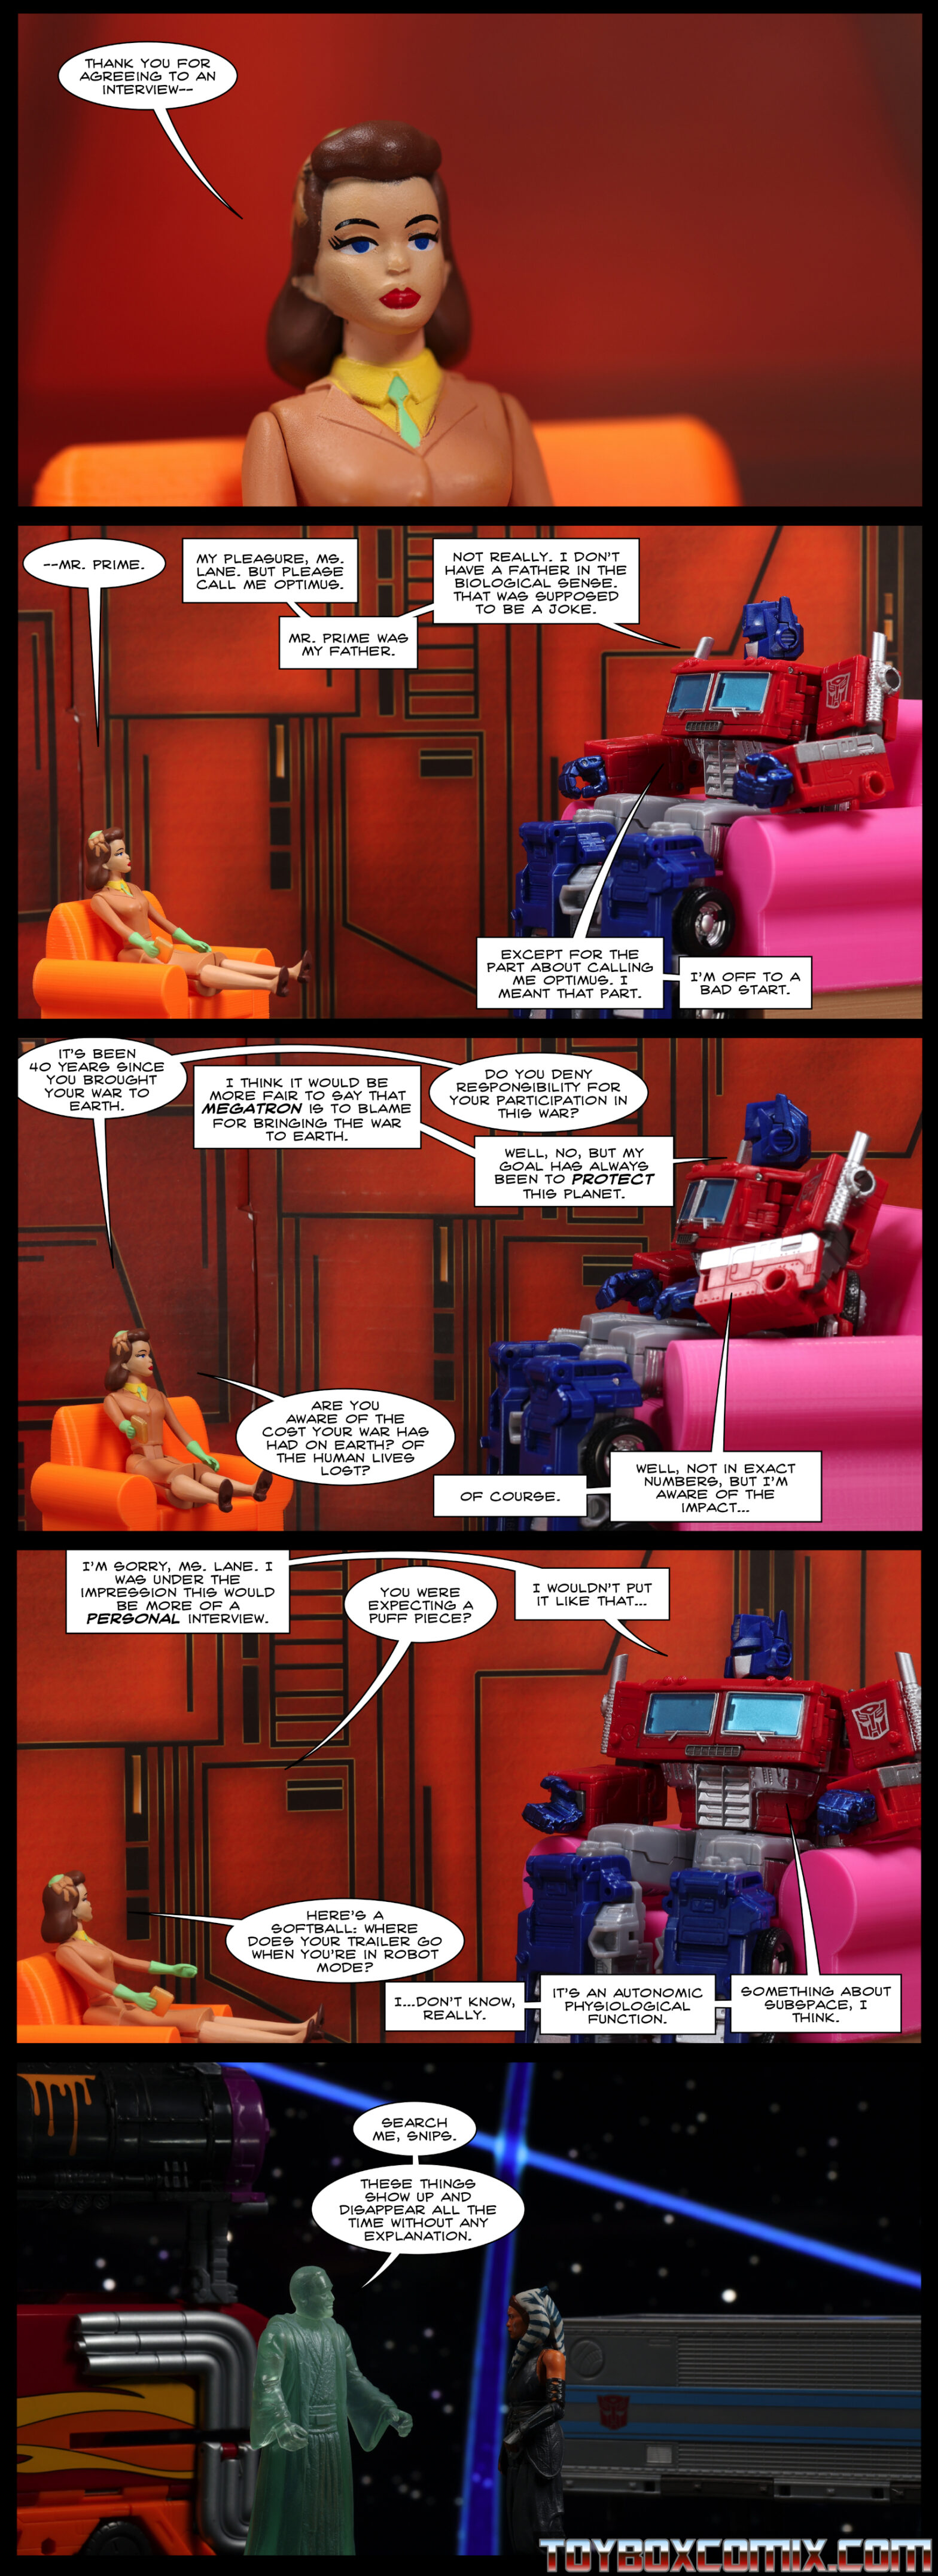 Panel 1: Lois Lane: “Thank you for agreeing to an interview—” 2: Location: Autobot base. Lois and Optimus Prime are seated in chairs. Lois: “—Mr. Prime.” Optimus: “My pleasure, Ms. Lane. But please call me Optimus. Mr. Prime was my father. Not really. I don’t have a father in the biological sense. That was supposed to be a joke. Except for the part about calling me Optimus. I meant that part. I’m off to a bad start.” 3: Lois: “It’s been 40 years since you brought your war to Earth.” Optimus: “I think it would be more fair to say that Megatron is to blame for bringing the war to Earth.” Lois: “Do you deny responsibility for your participation in this war?” Optimus: “Well, no, but my goal has always been to protect this planet.” Lois: “Are you aware of the cost your war has had on Earth? Of the human lives lost?” Optimus: “Of course. Well, not in exact numbers, but I’m aware of the impact…” 4: Optimus: “I’m sorry, Ms. Lane. I was under the impression this would be more of a personal interview.” Lois: “You were expecting a puff piece?” Optimus: “I wouldn’t put it like that…” Lois: “Here’s a softball: where does your trailer go when you’re in robot mode?” Optimus: “I…don’t know, really. It’s an autonomic physiological function. Something about subspace, I think.” 5: Location: World Between Worlds. Anakin (old ghost) and Ahsoka stand in front of an Optimus Prime trailer, a Rodimus Prime trailer, and a Toxitron trailer. Anakin: “Search me, Snips. These things show up and disappear all the time without any explanation.”